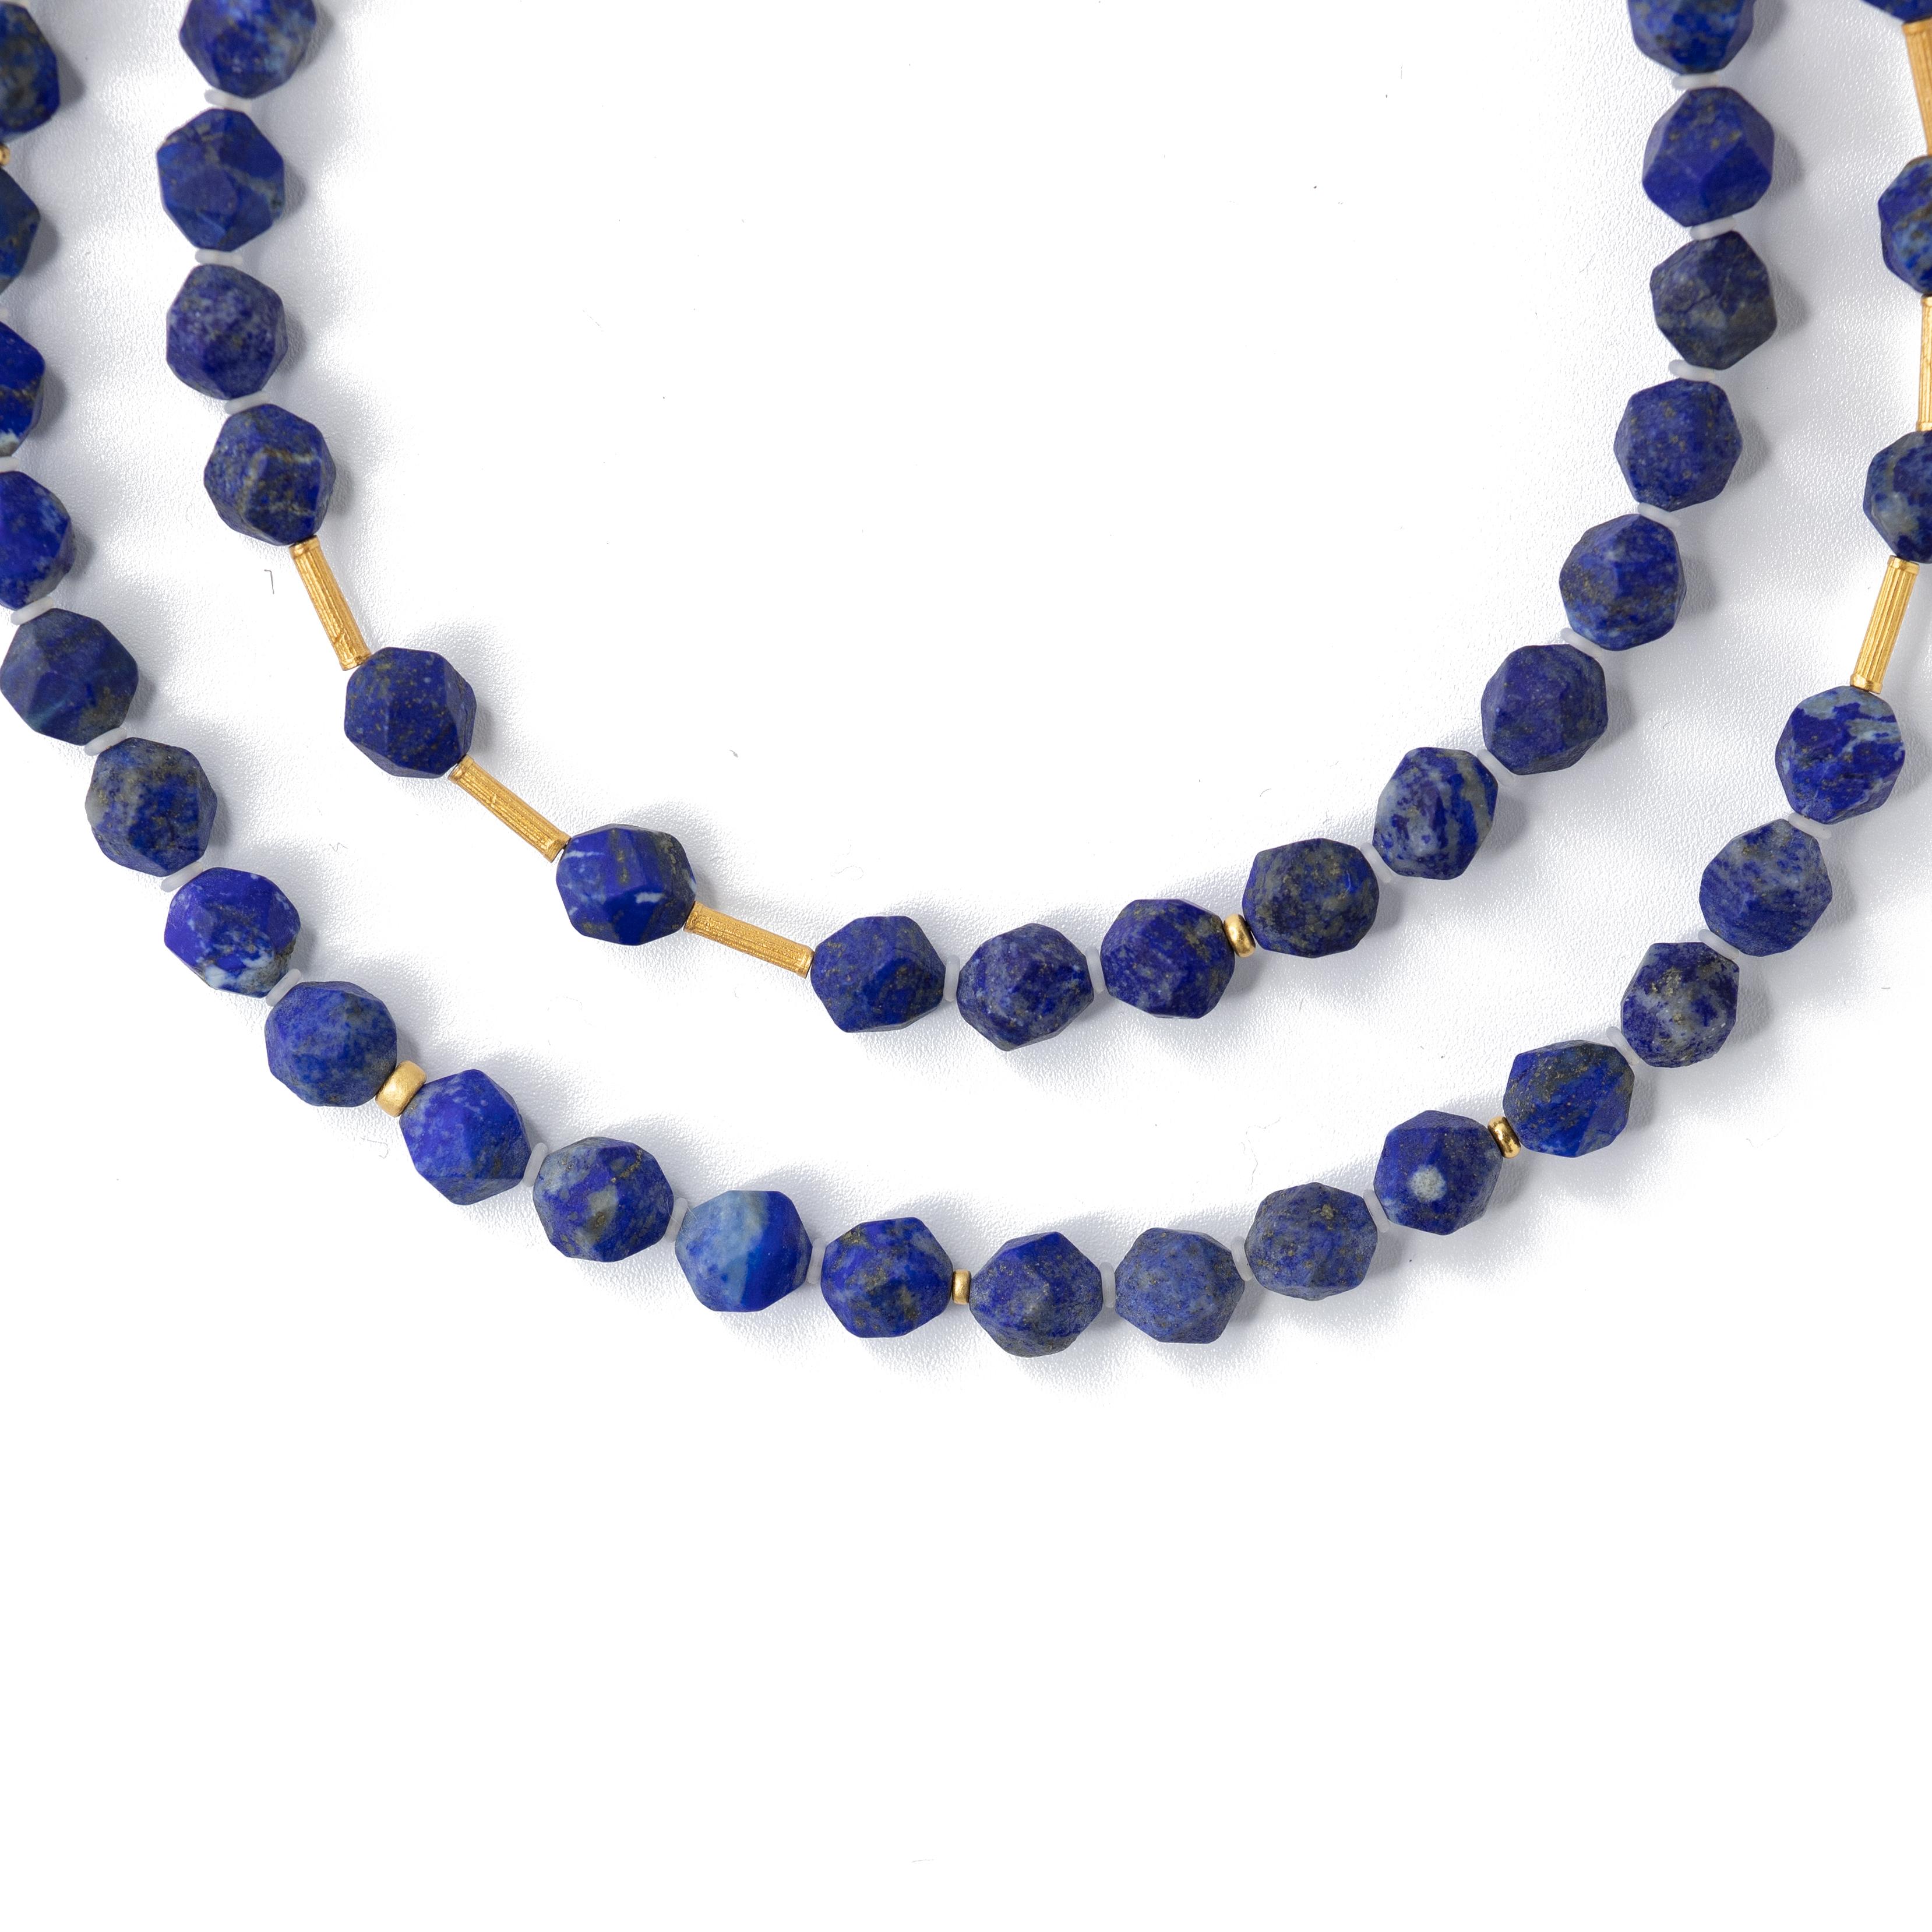 This necklace is crafted from apis Lazuli Beads  and Gold Plated Sterling Silver Beads, inspired by Salvador Dali's Famous Painting 